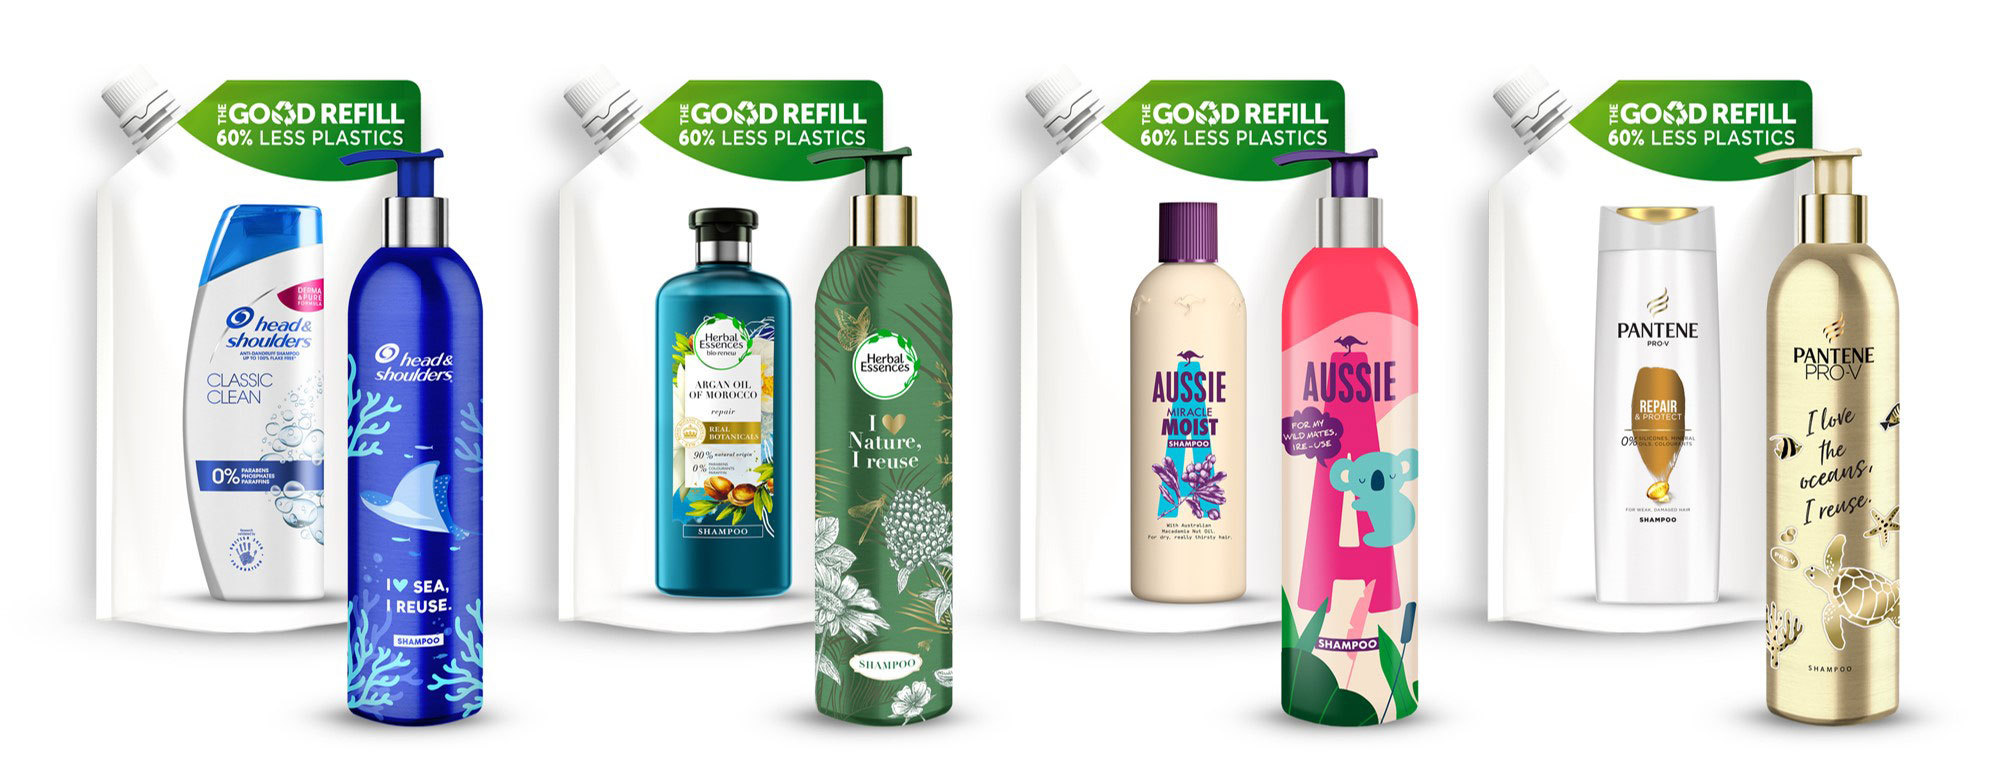 P&G Beauty Announces the Launch of Its First Ever Reusable and Refillable Aluminium Bottle System at Scale, with its Brands Head & Shoulders, Pantene, Essences and Aussie in Europe | Business